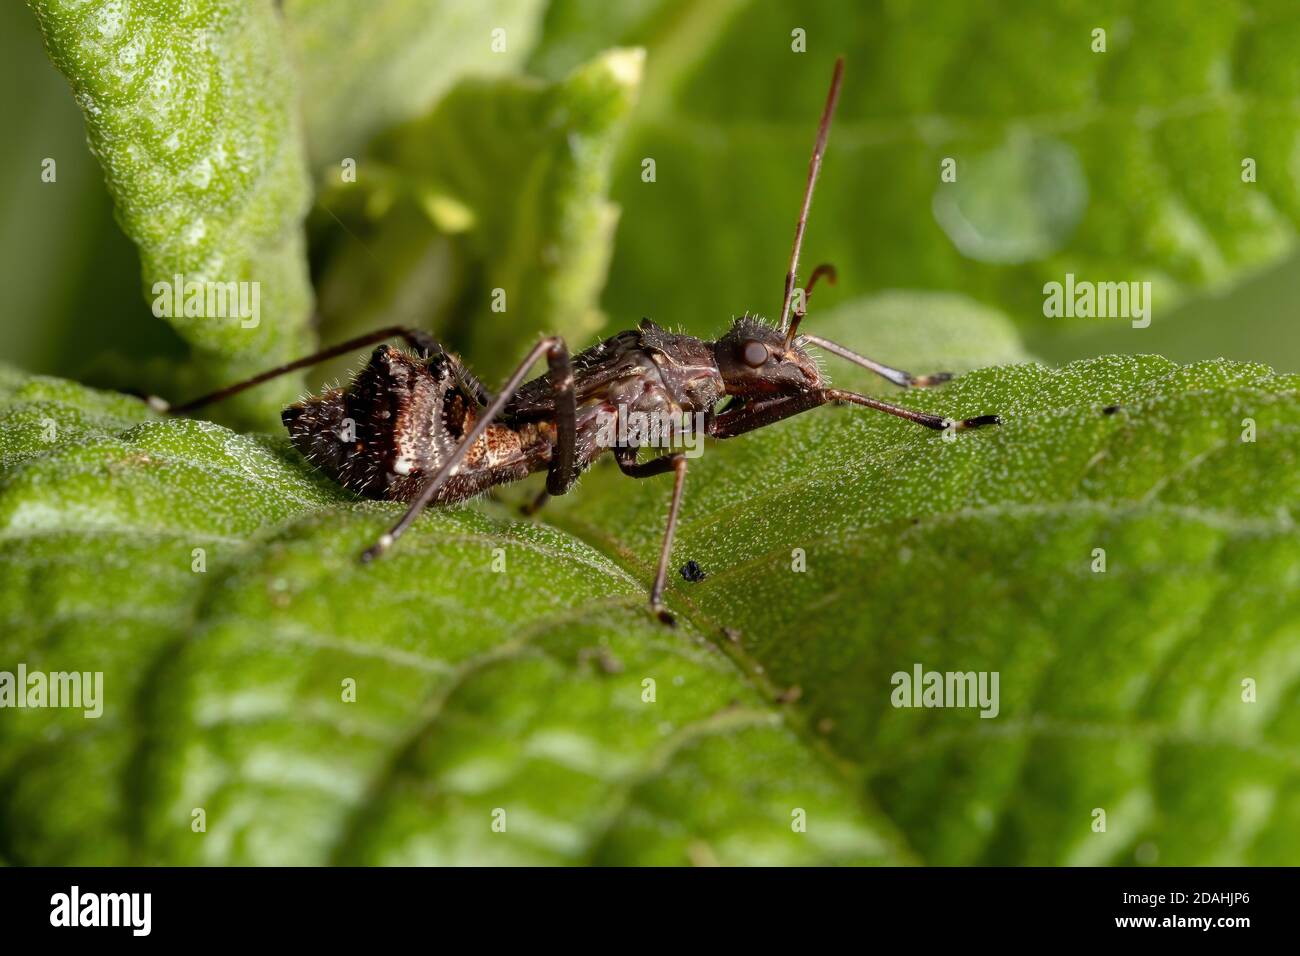 Broad-headed Bug Nymph of the Family Alydidae Stock Photo